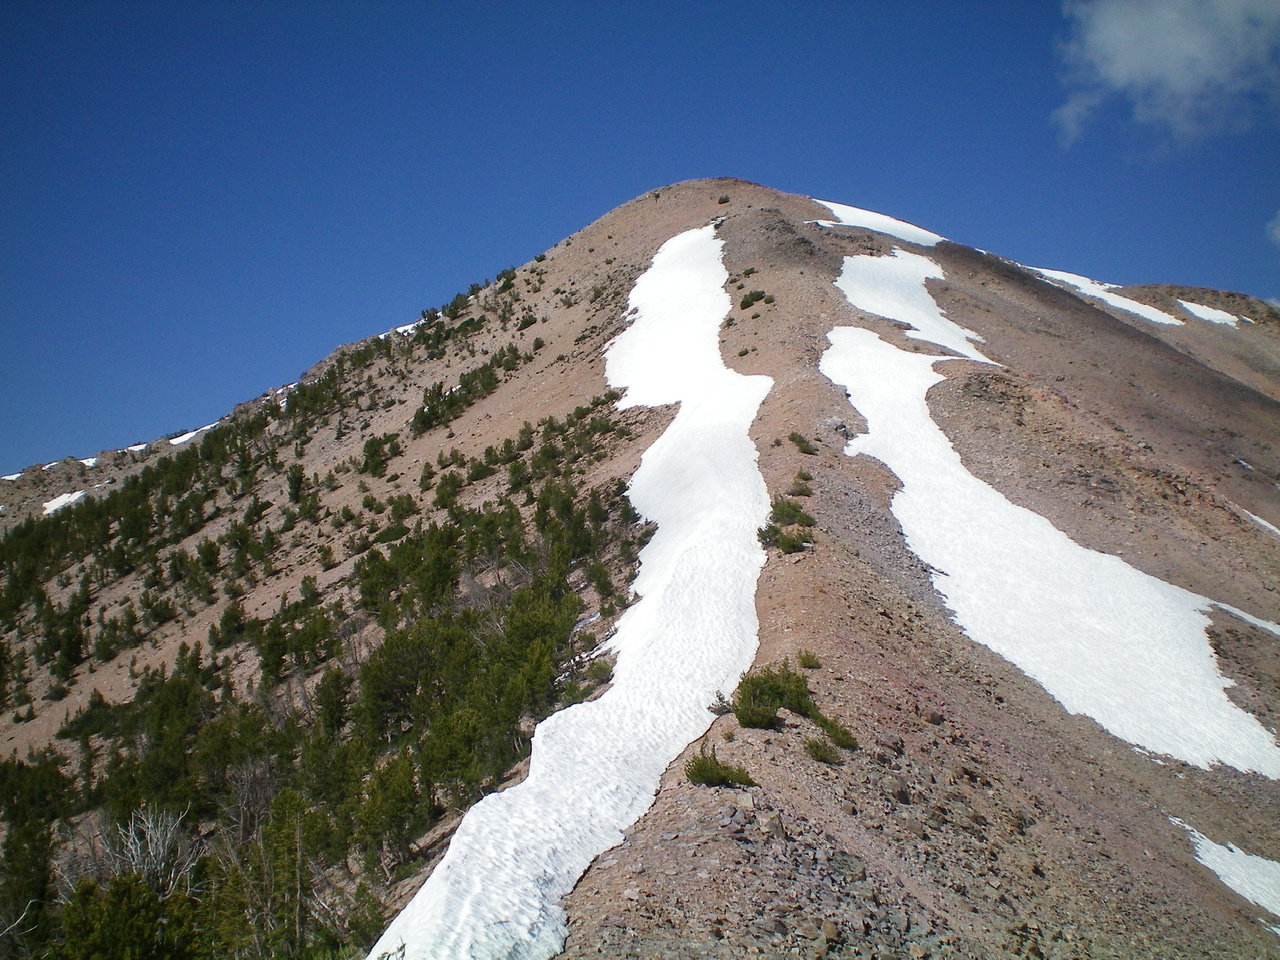 The easy Northeast Ridge of Peak 10349 as viewed from just E of the connecting saddle at the base of the ridge. Lots of lingering snow on both sides of the ridge. Livingston Douglas Photo 